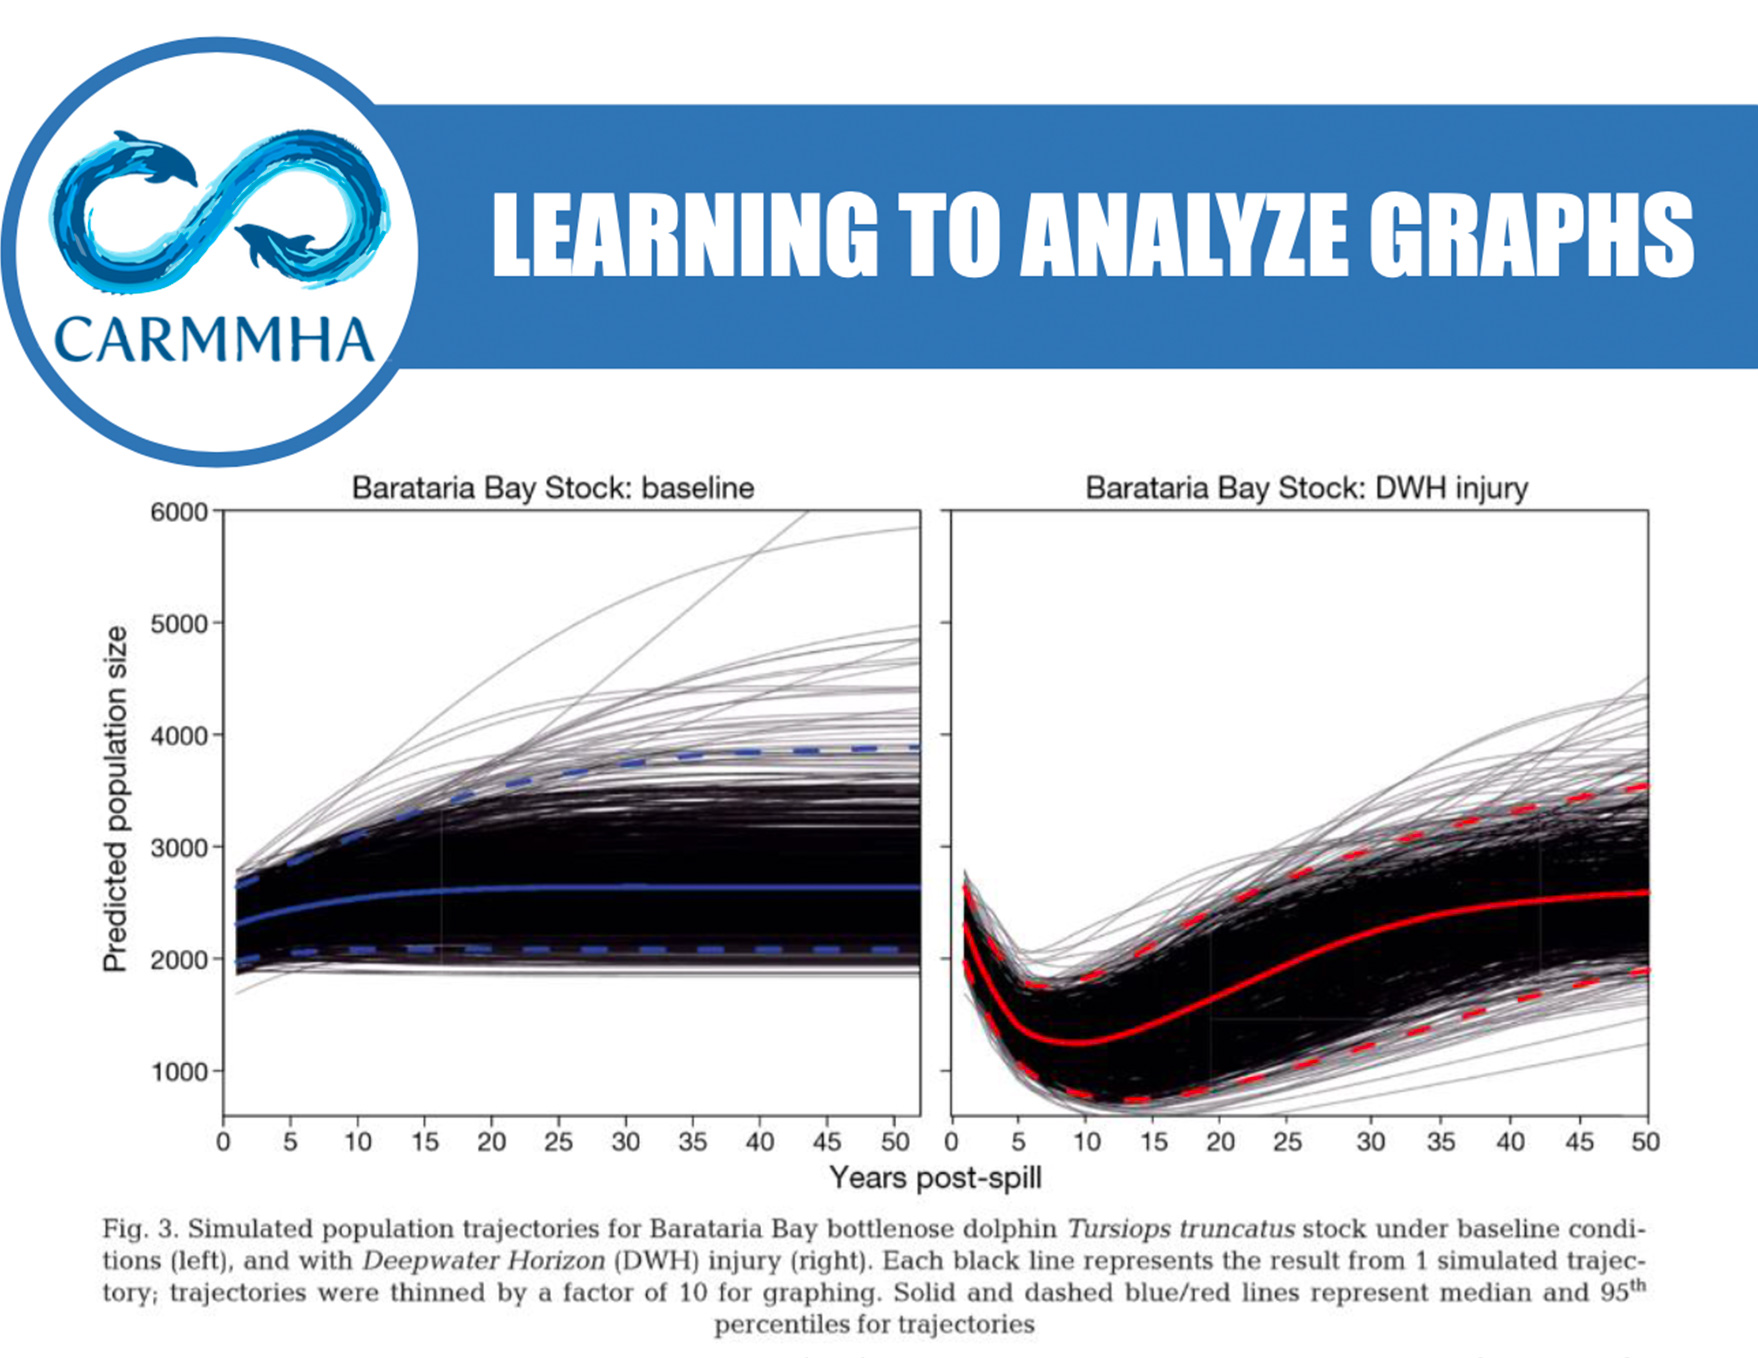 Analyze graphs related to dolphin populations trajectories